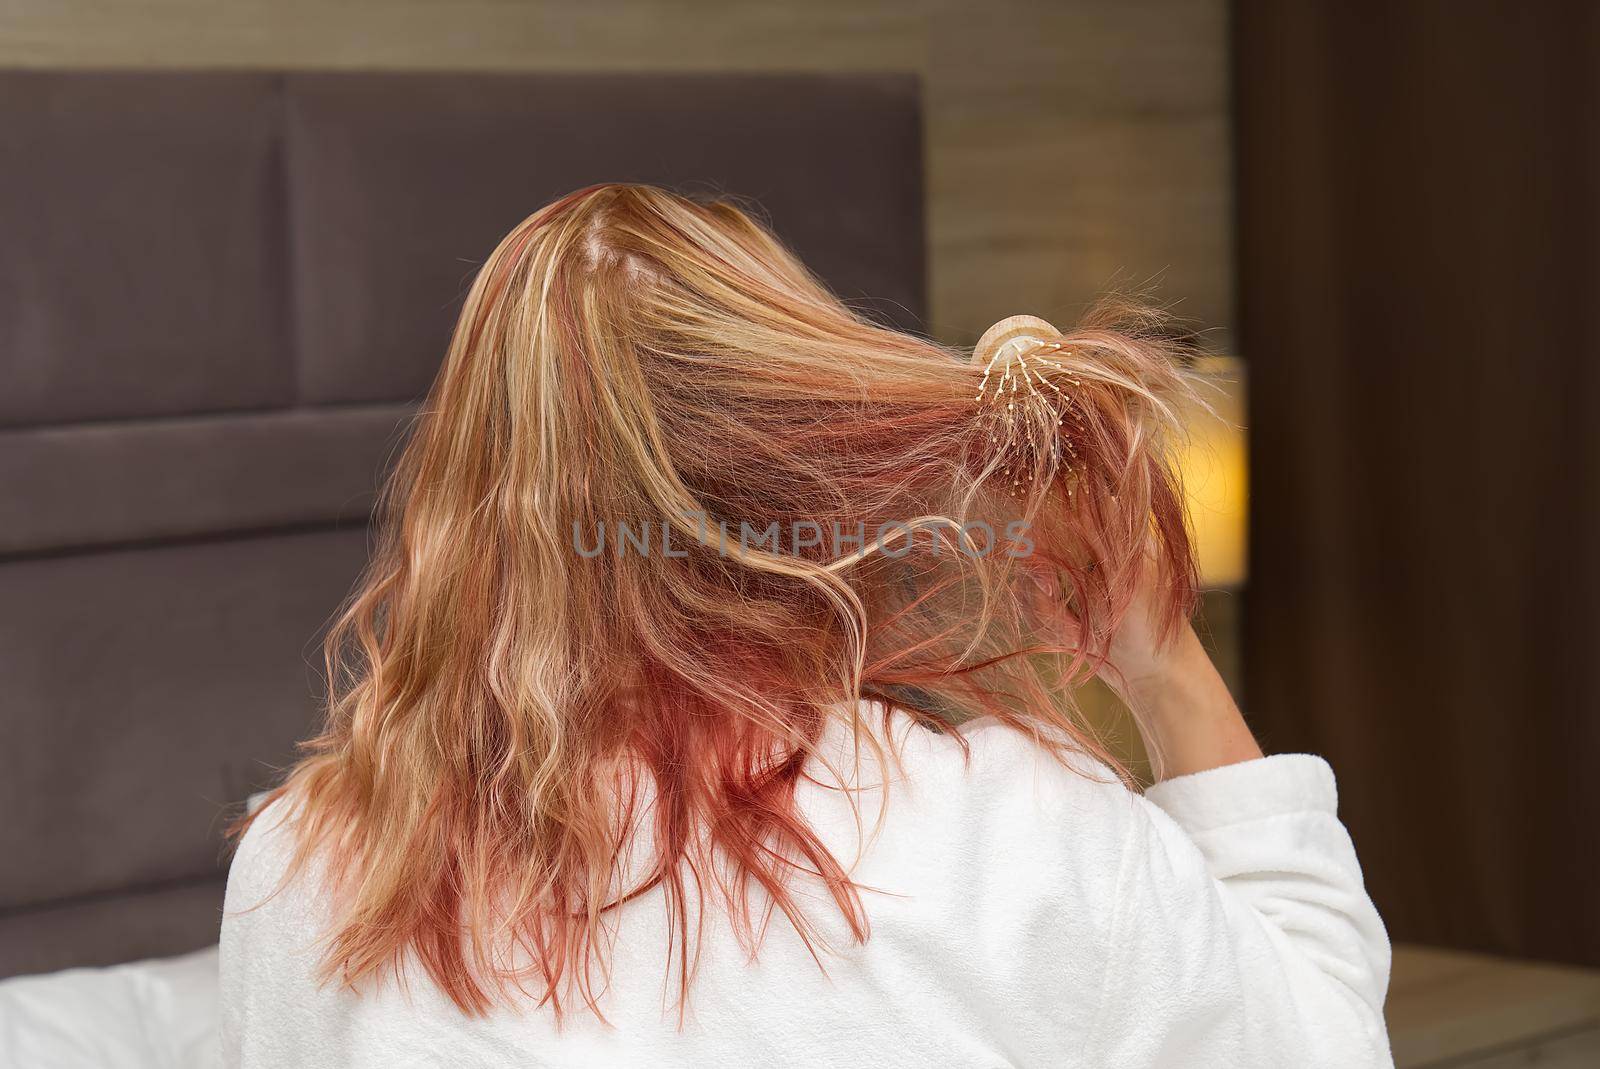 a blonde with dyed hair combing her tangled hair after a shower with a wooden comb. by PhotoTime